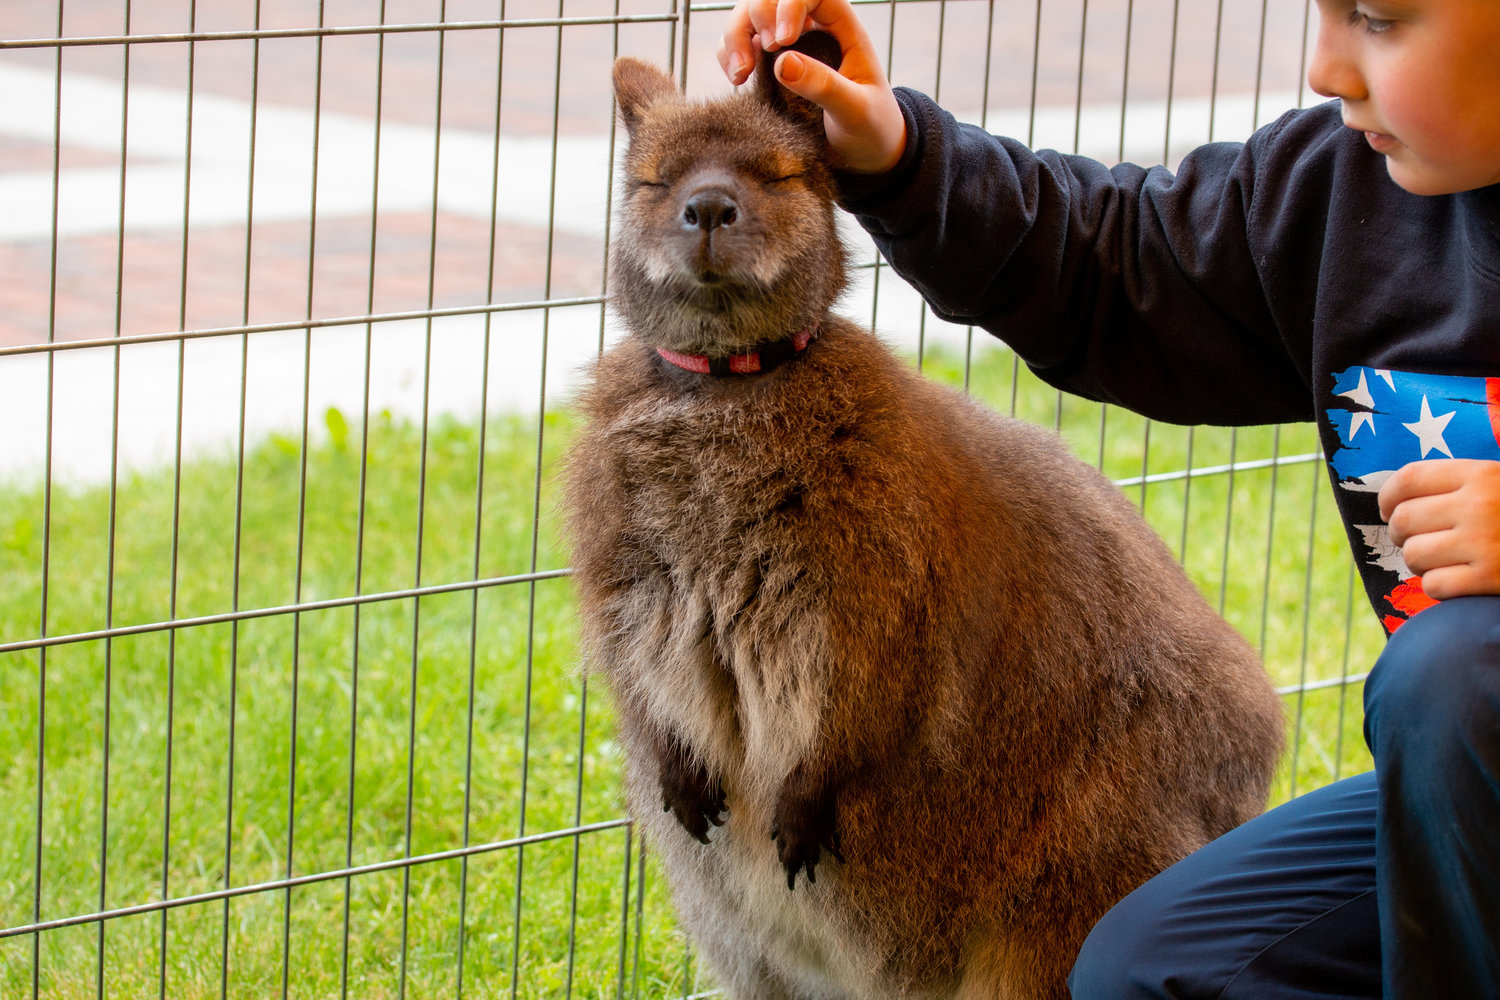 This wallaby poses sweetly as a young boy gives some pets at the petting zoo at the Centralia College SpringFest Tuesday afternoon.